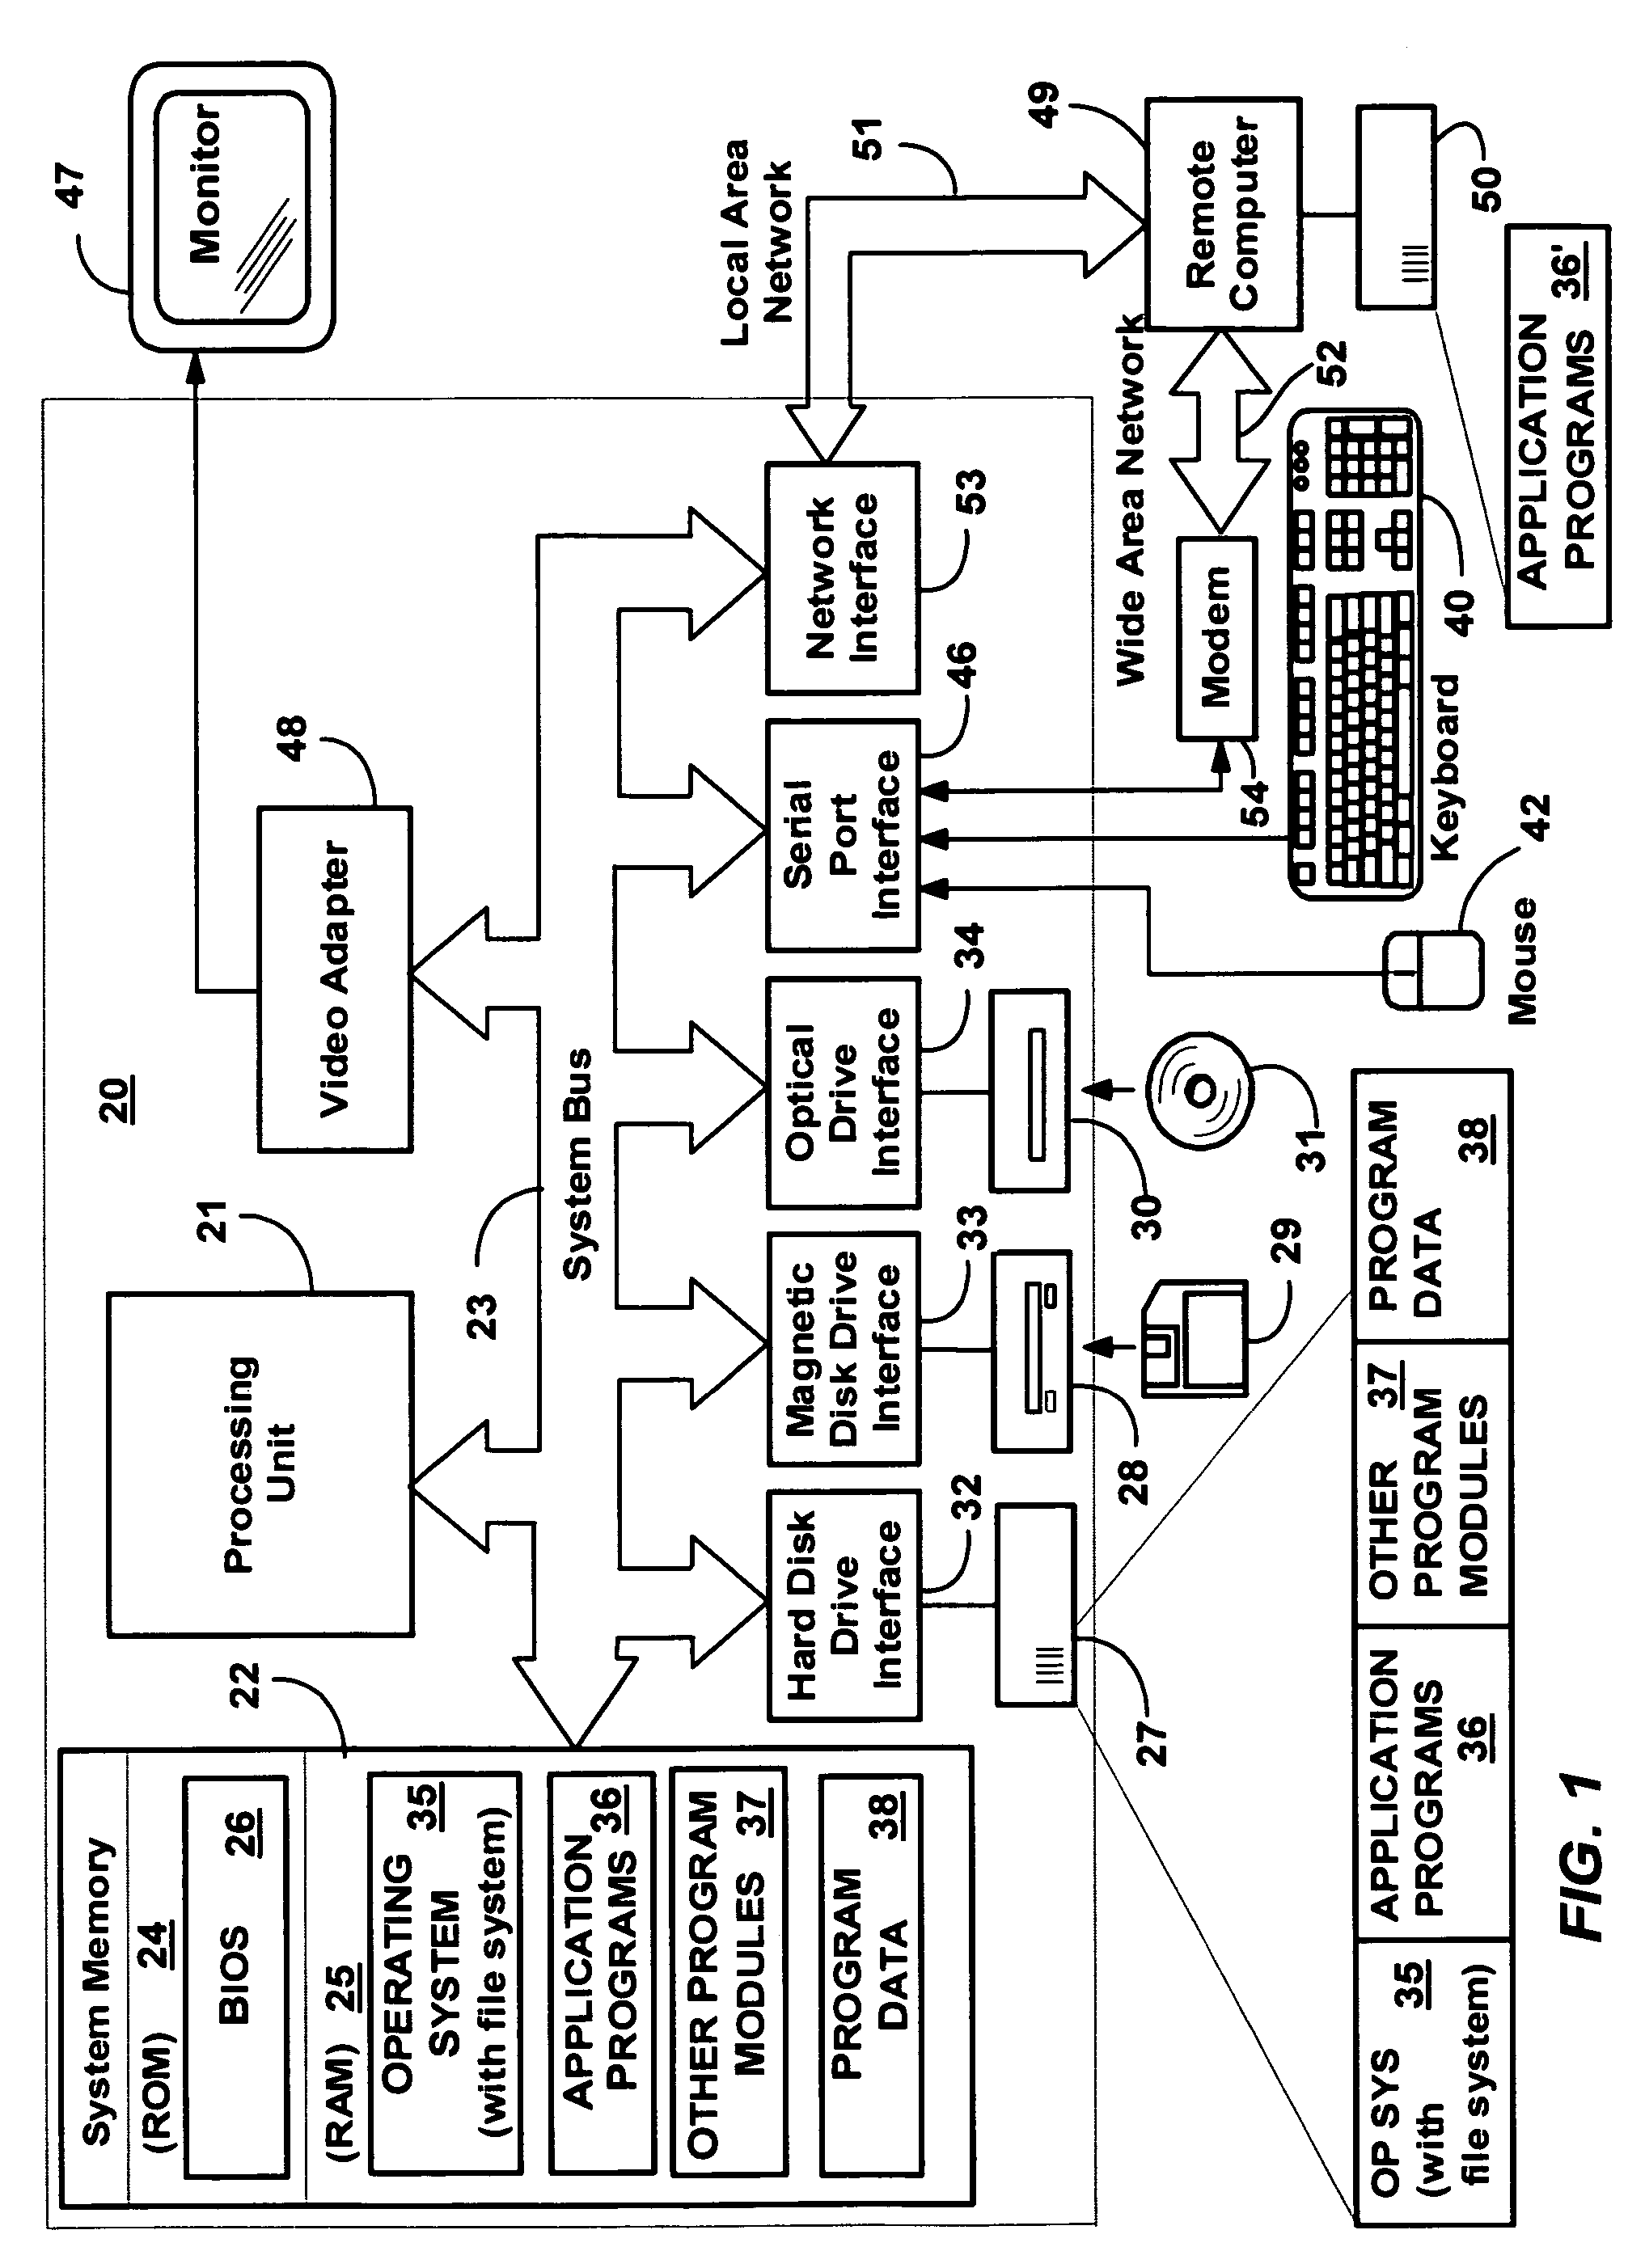 Method and system for monitoring and verifying software drivers